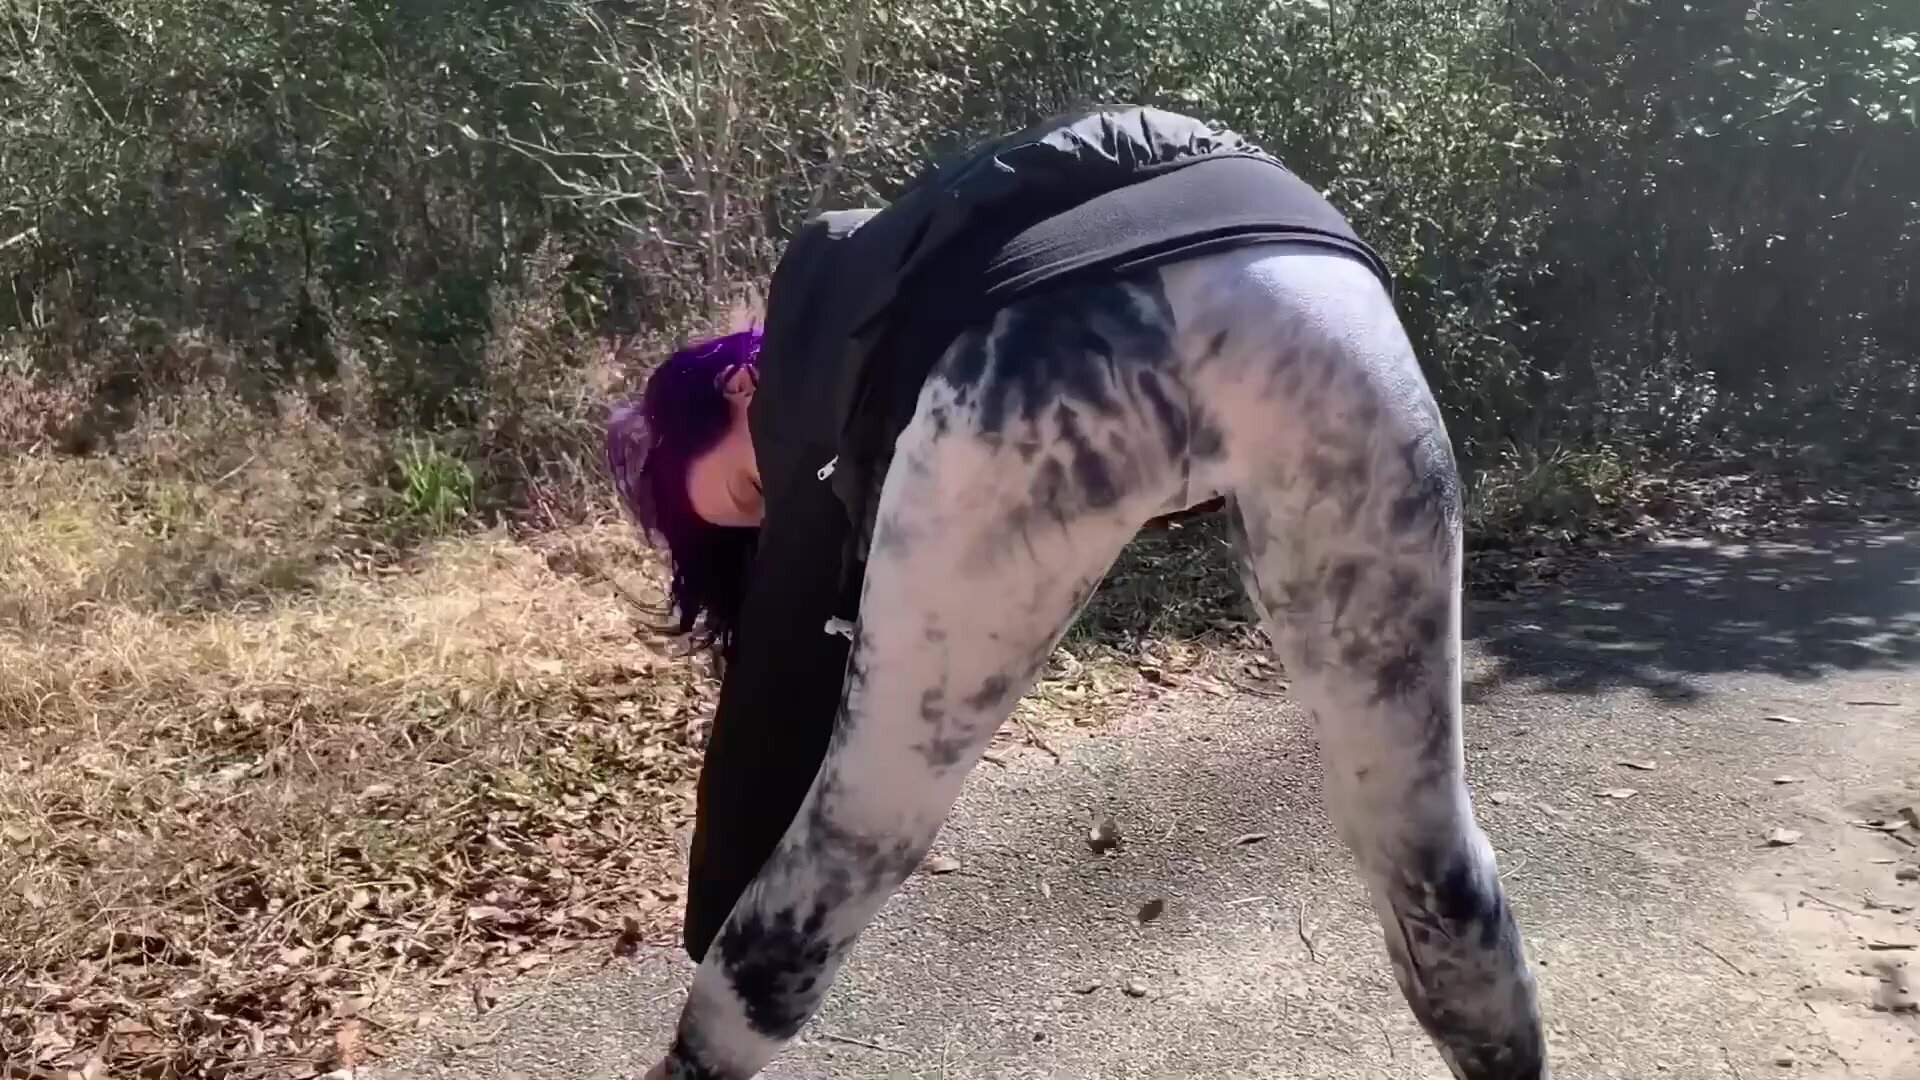 Punk Babe After Hike